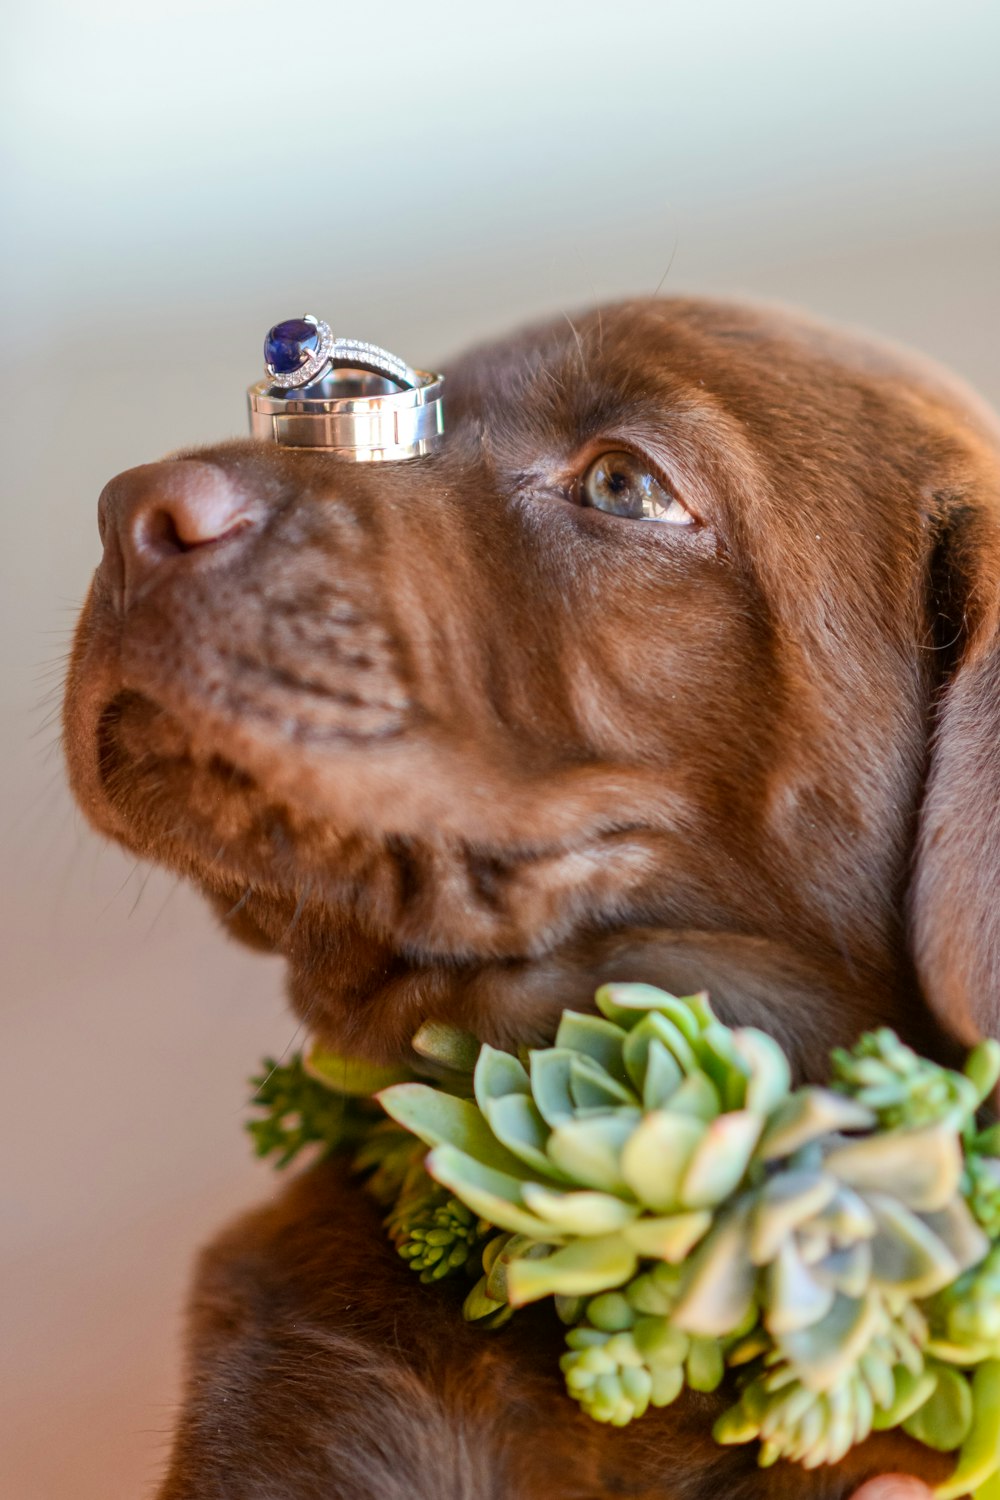 brown short coated dog with silver bell on mouth